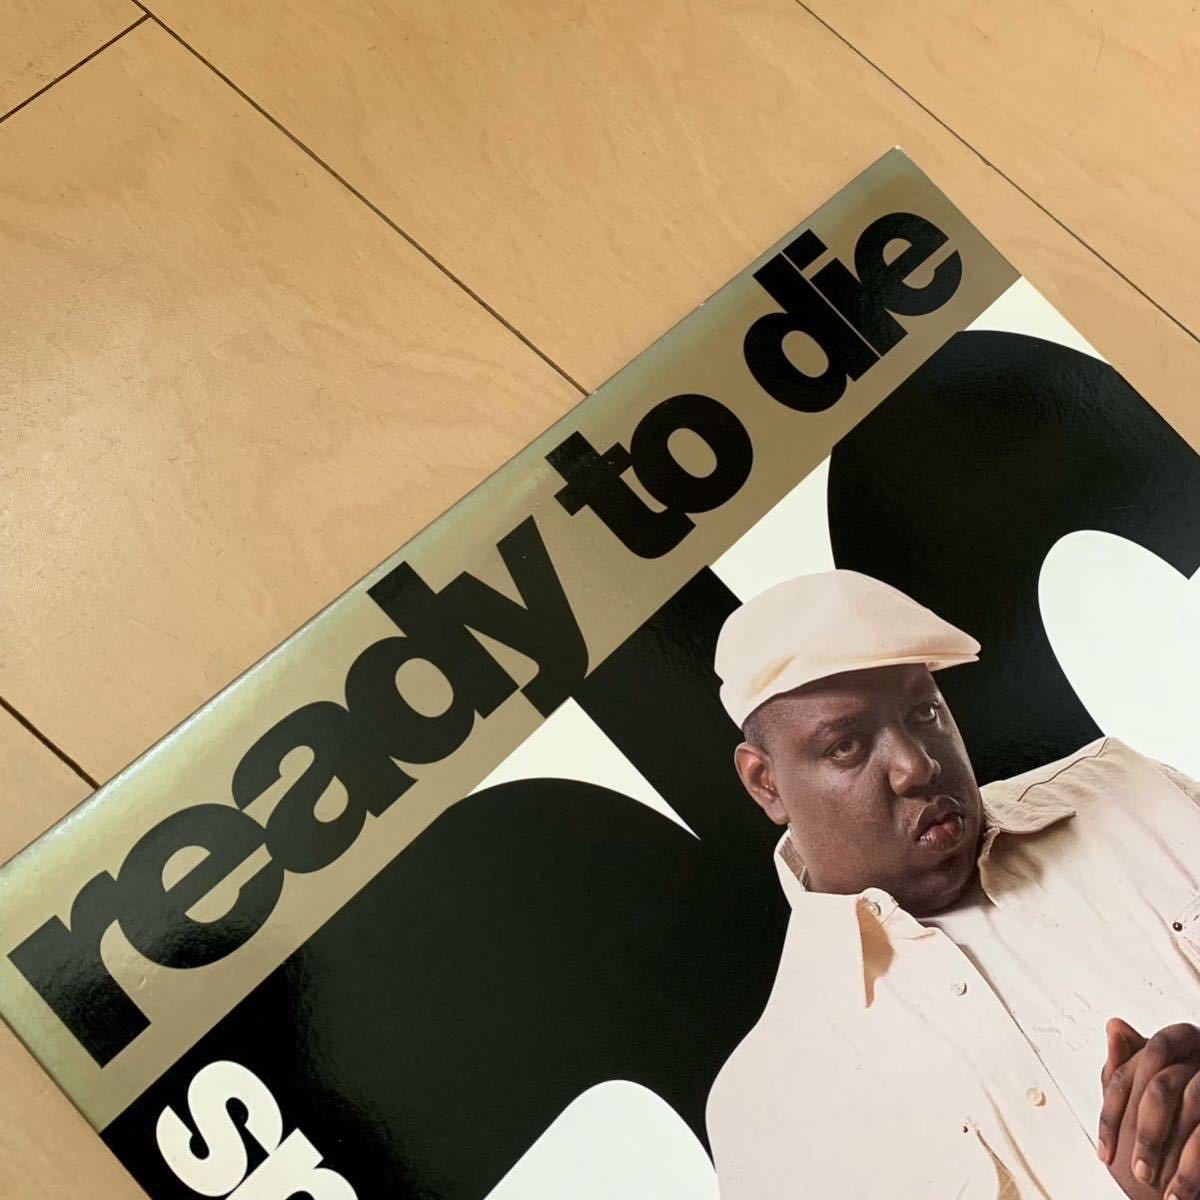 USオリジナル盤２LP / NOTORIOUS B.I.G. / READY TO DIE NOTORIOUS BIG / BIGGIE / ビギー (検)アルバム/90’s HipHop/Nas/Dr. Dre/Jay-z_画像5